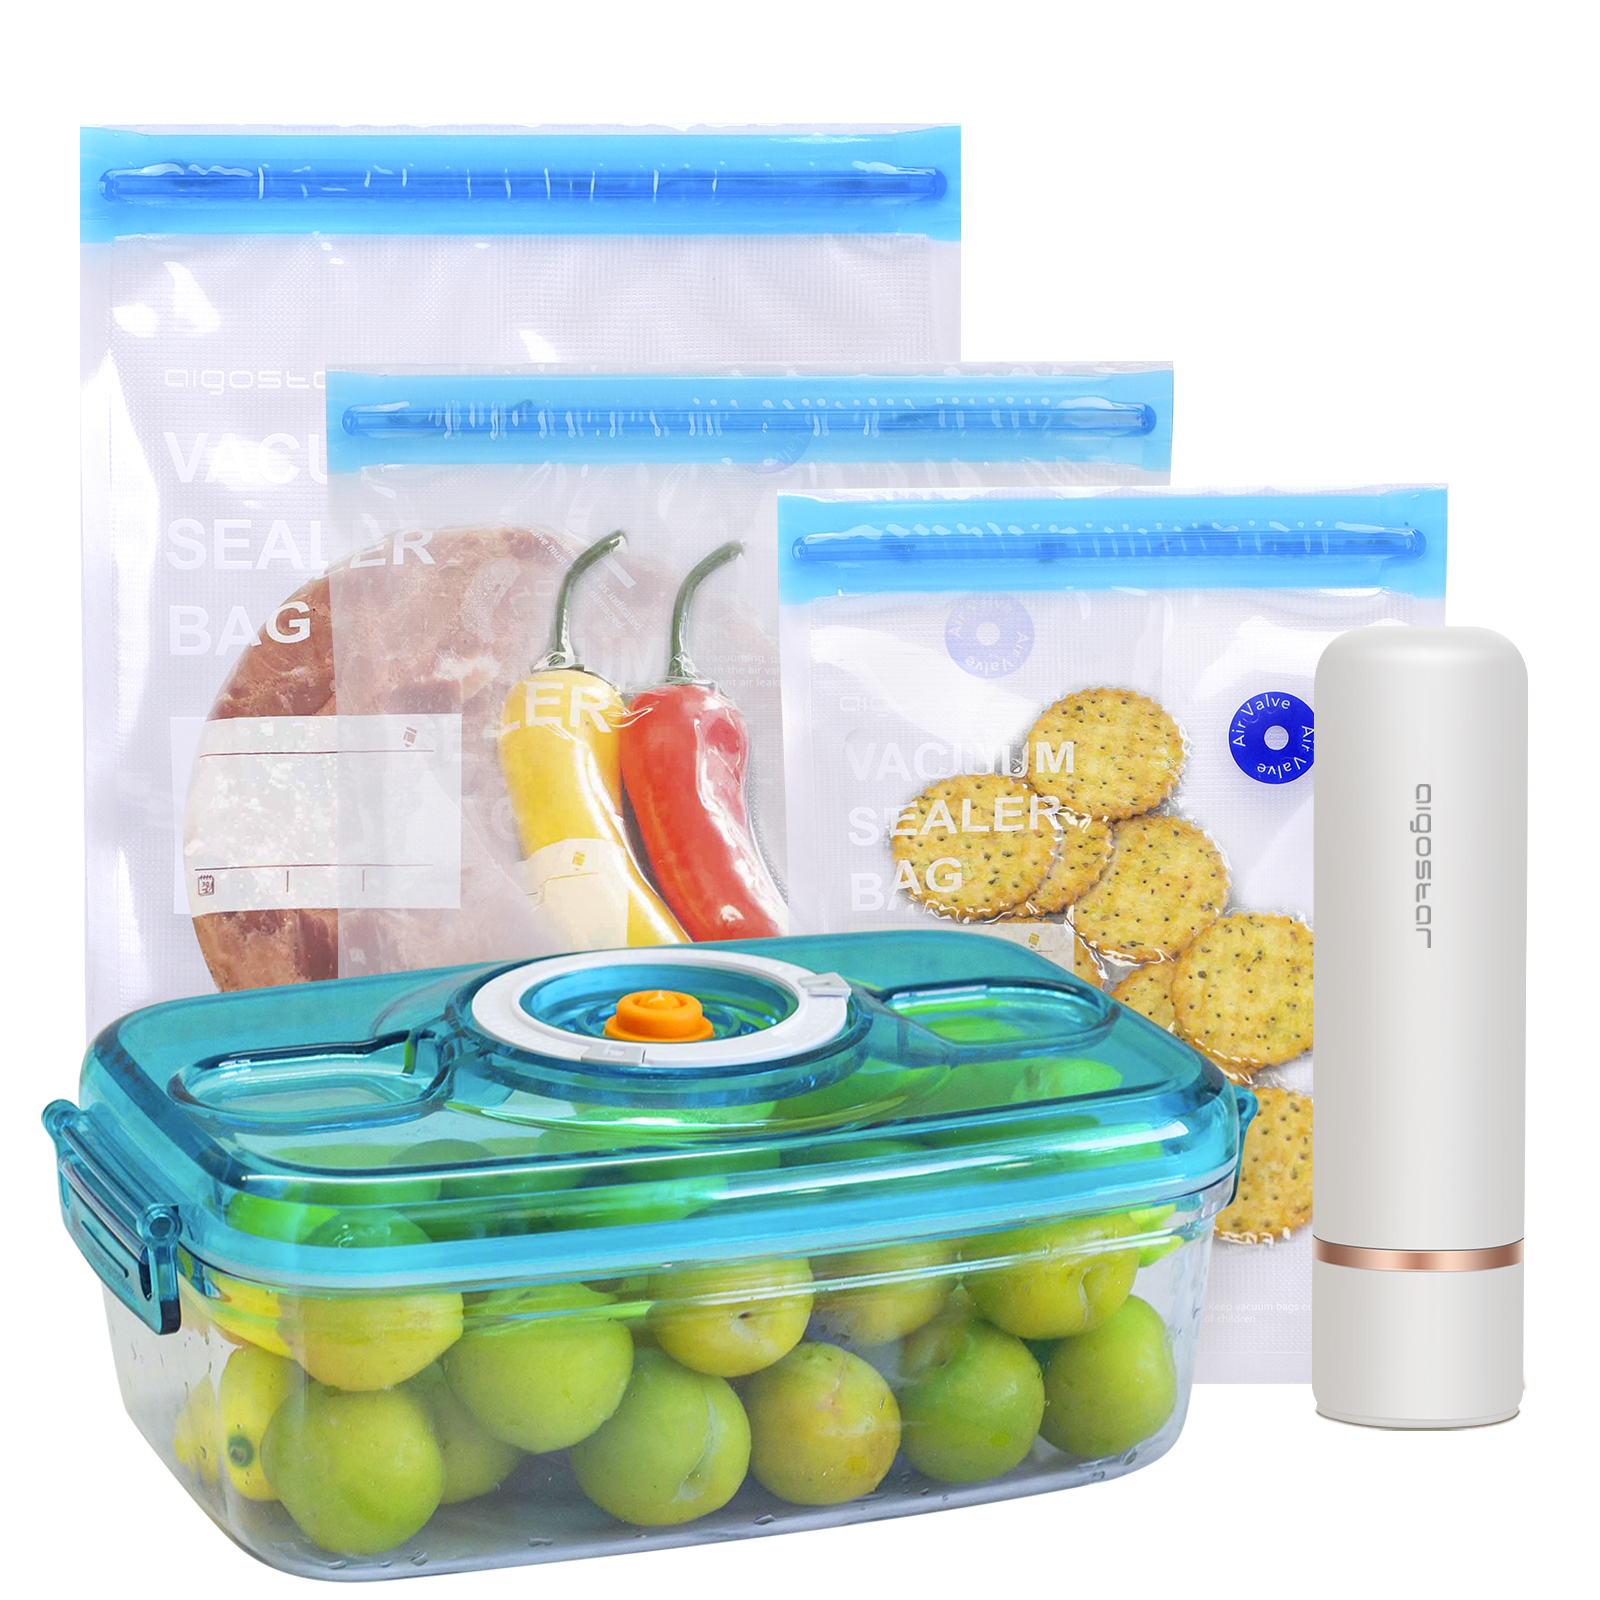 *CLEARANCE SALE*  Vacuum sealer kit, 3 food containers, 3 bags, electric vacuum pump, Aigostar Fresh